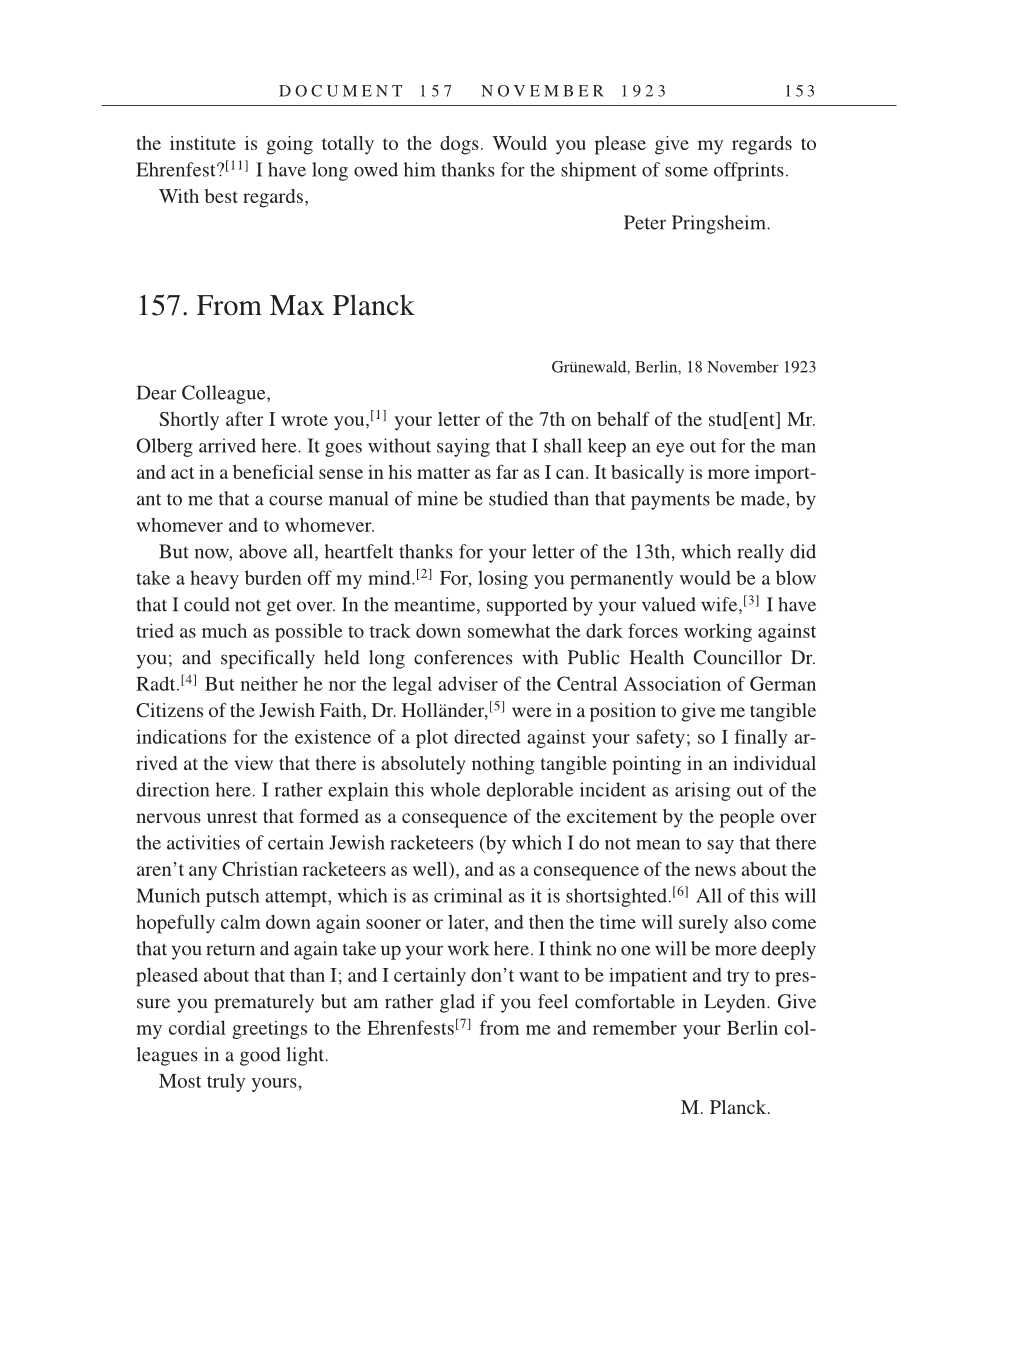 Volume 14: The Berlin Years: Writings & Correspondence, April 1923-May 1925 (English Translation Supplement) page 153